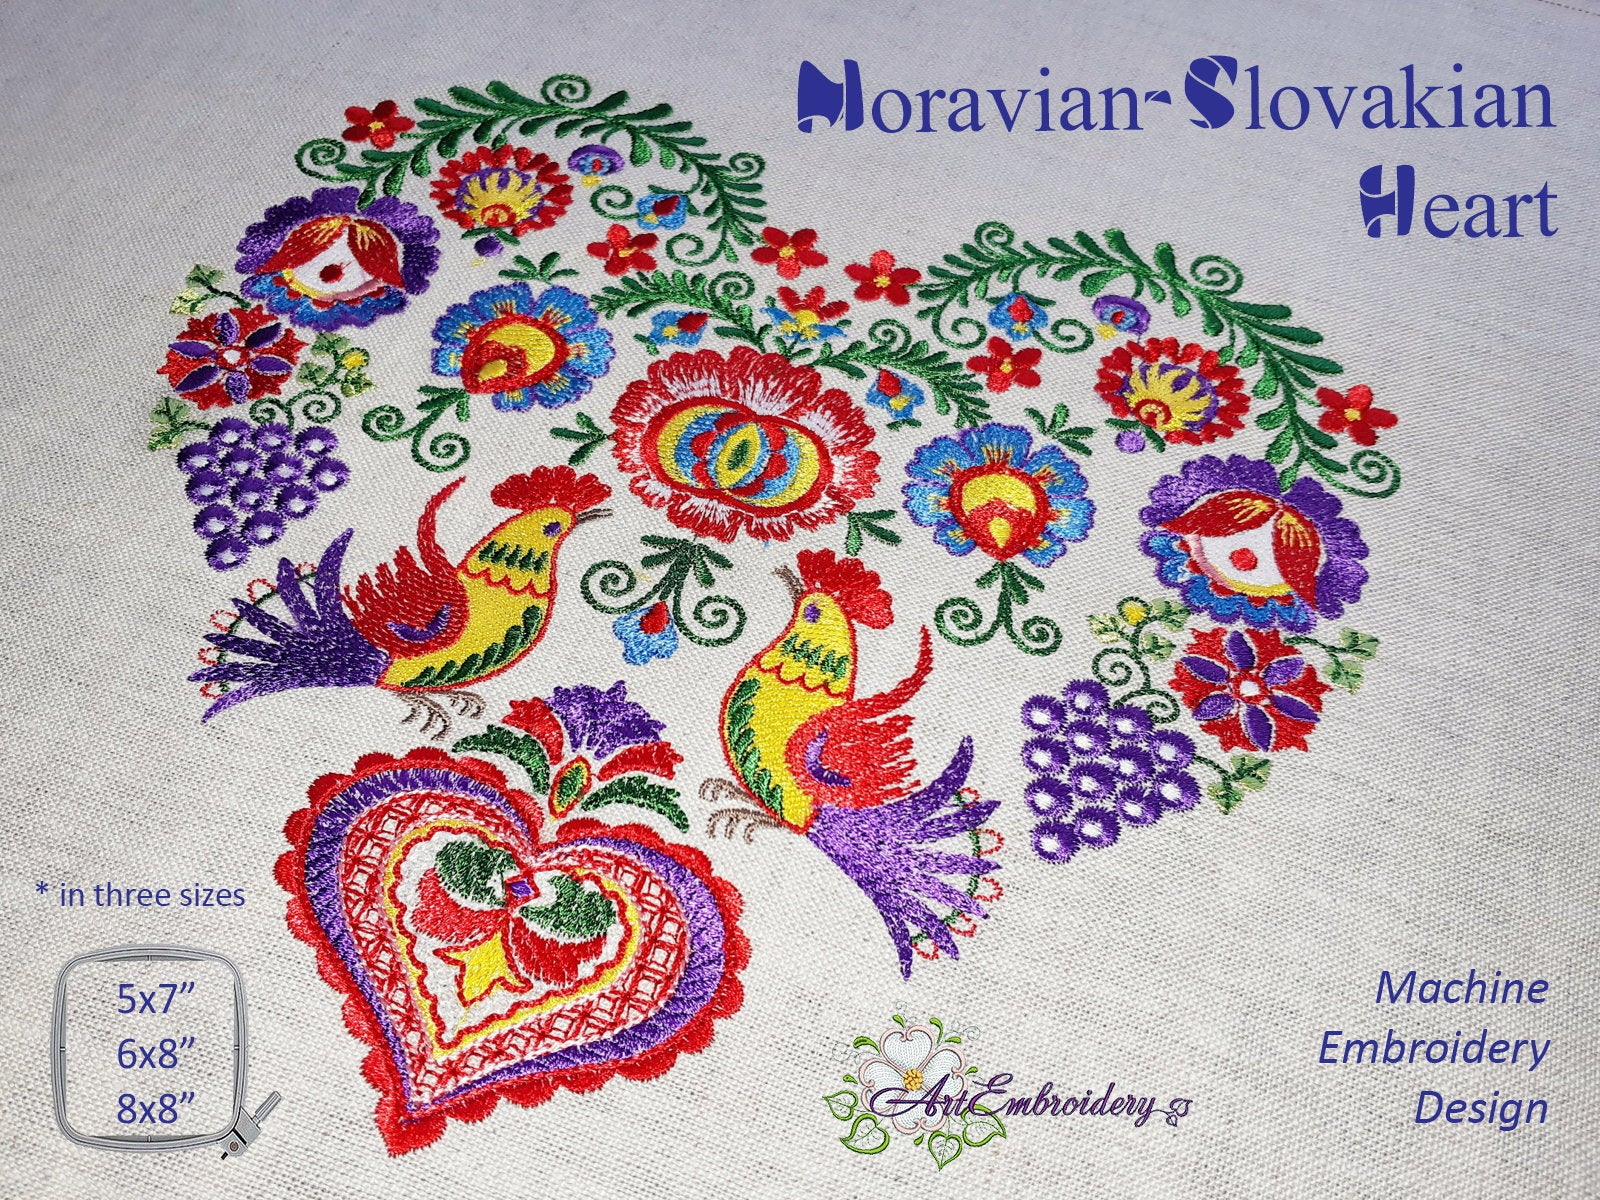 Slovak Embroidery Patterns Moravian Slovakian Heart Machine Embroidery Design In Three Sizes